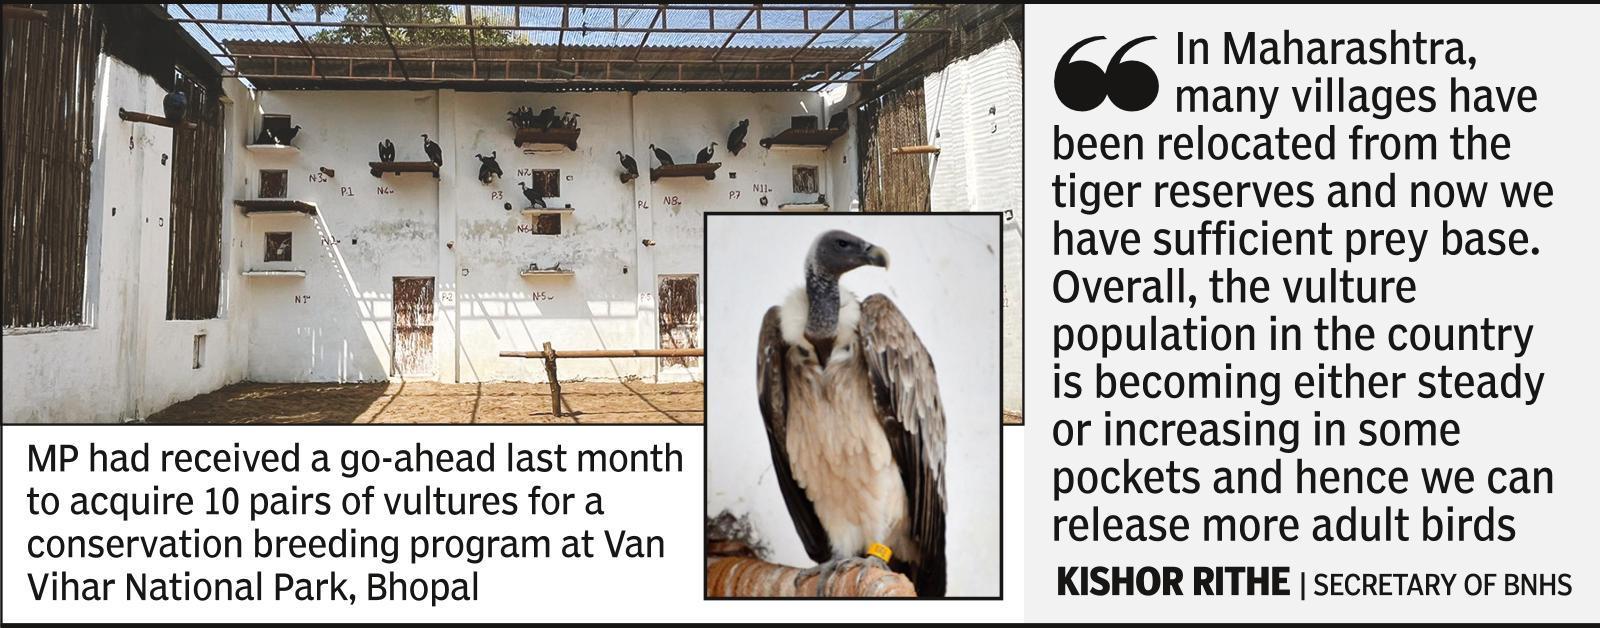 Tadoba, Pench, Melghat prepare for new guests as Maha set to get 20 pairs of vultures from Haryana